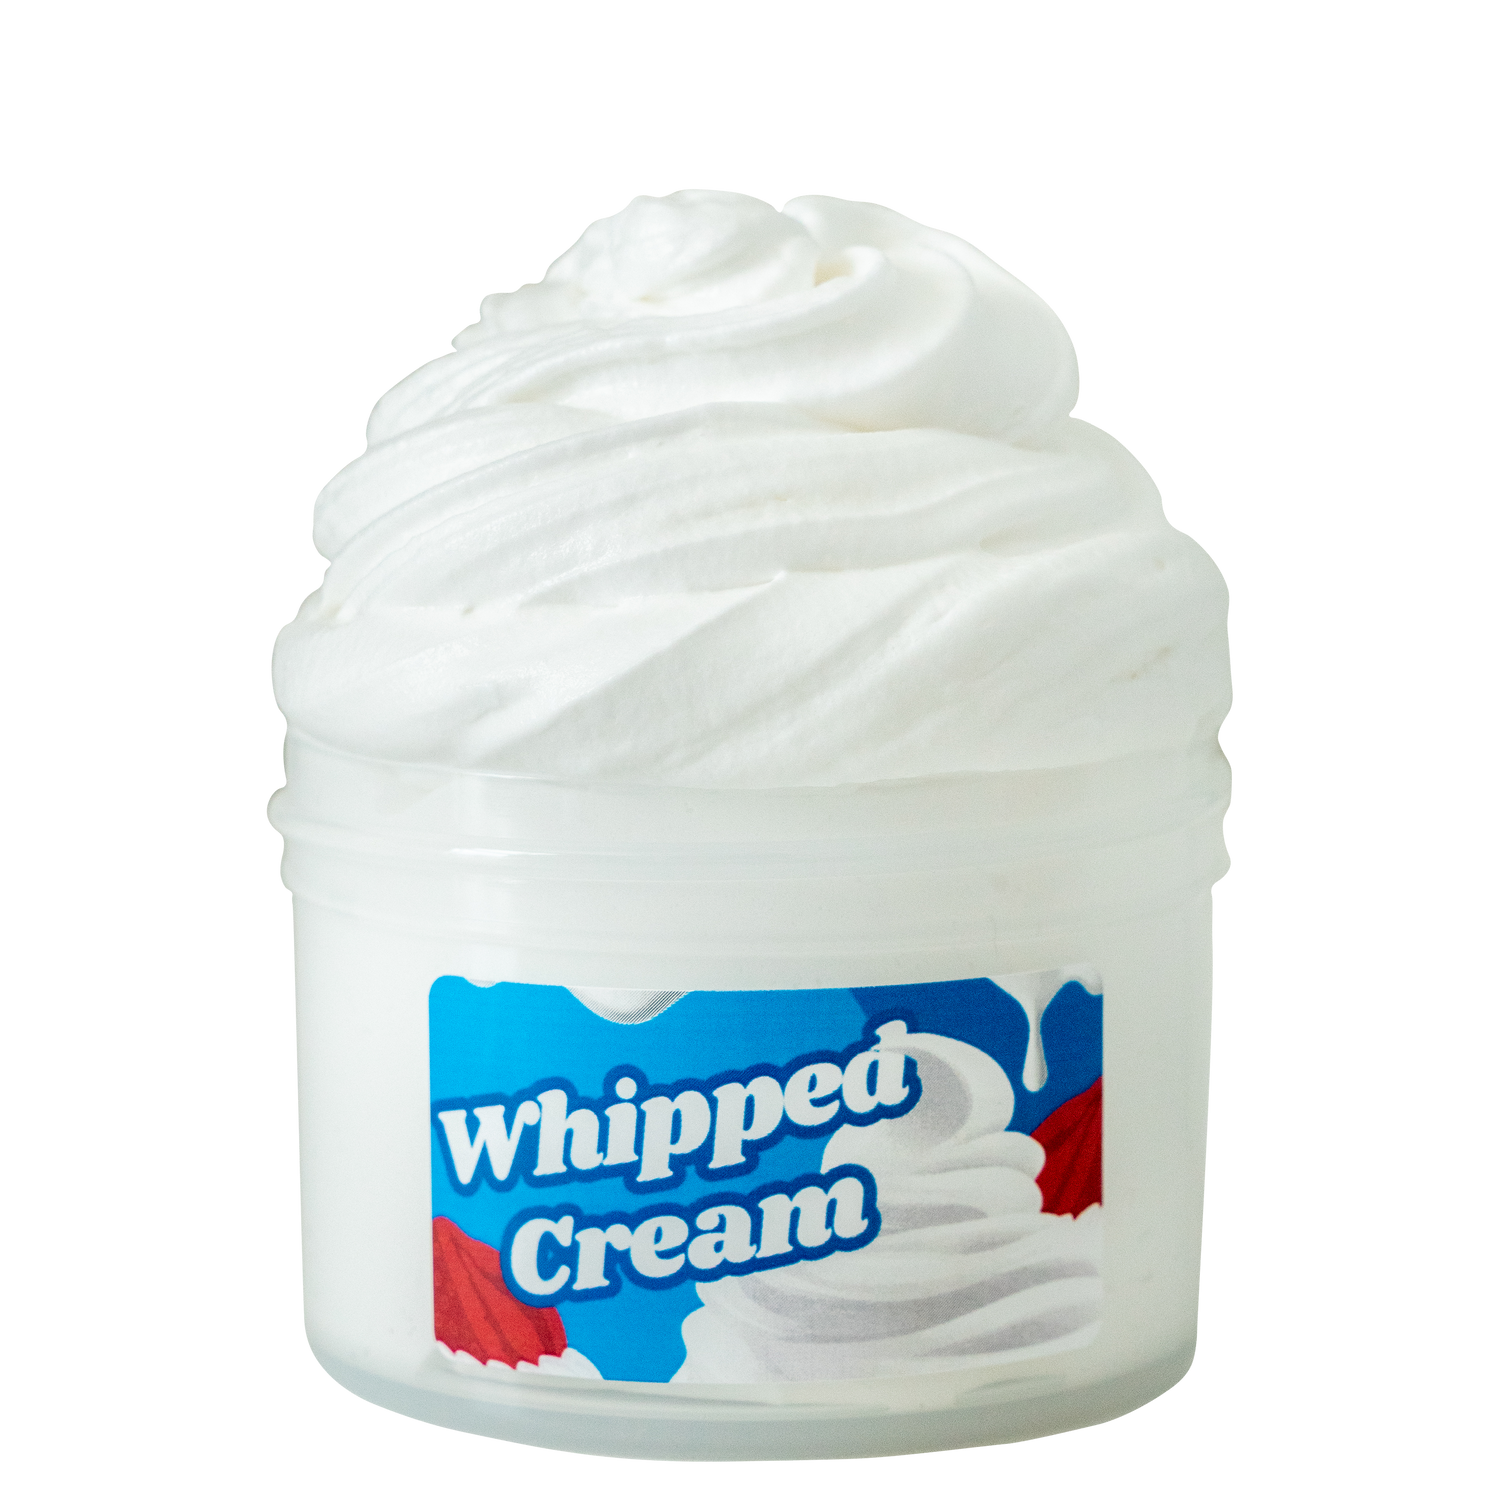 Fun with whipped cream at FunBags